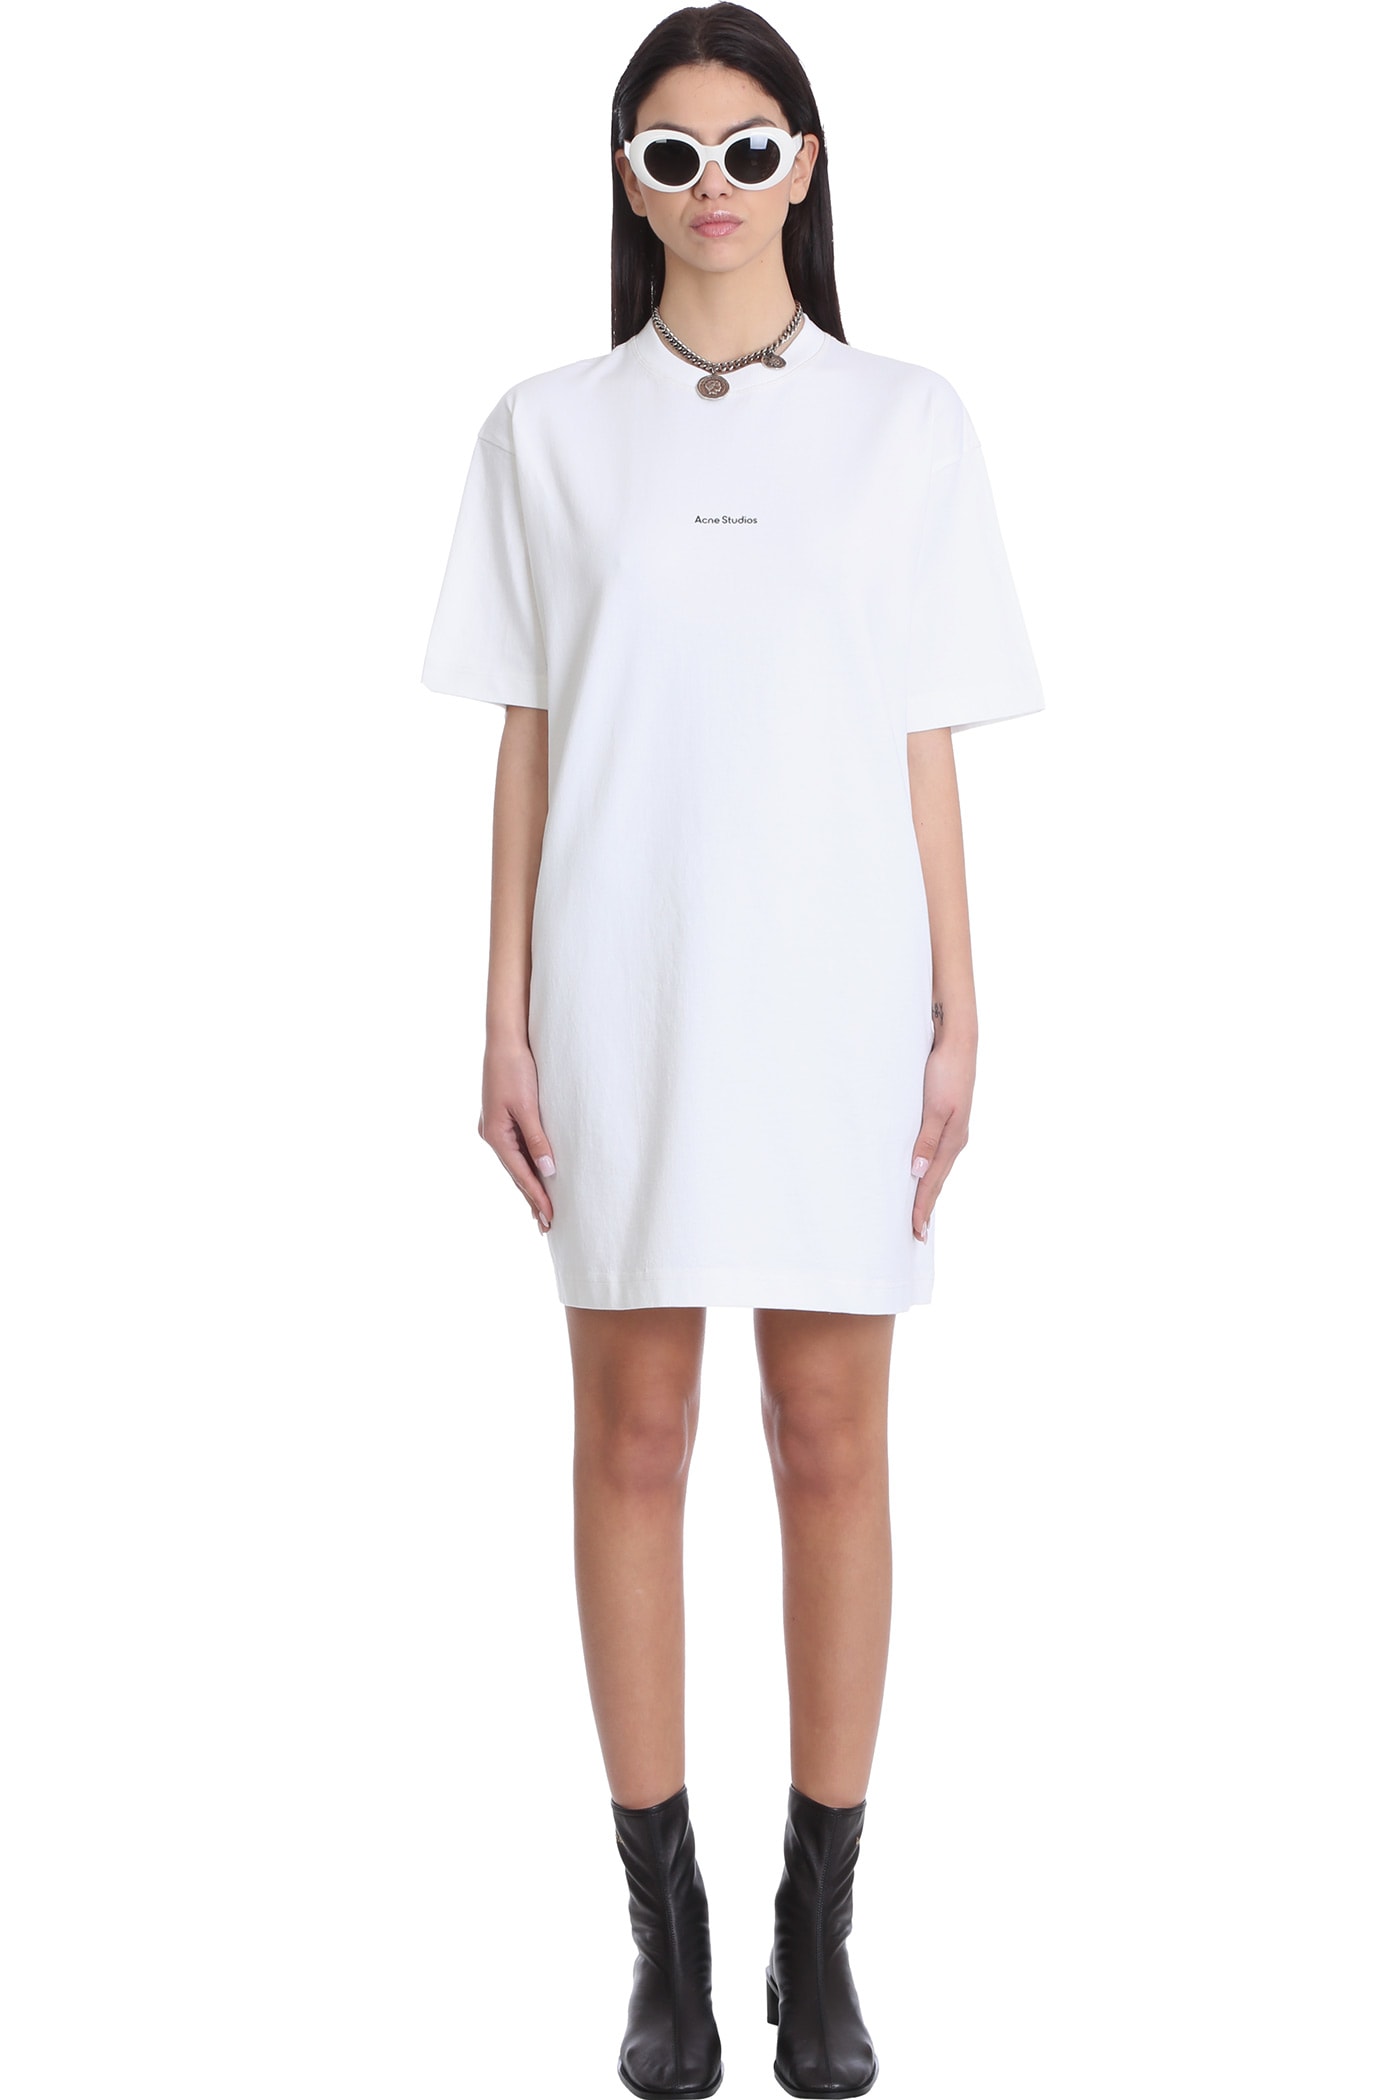 ACNE STUDIOS ERIN STAMP T-SHIRT IN WHITE COTTON,A20281183